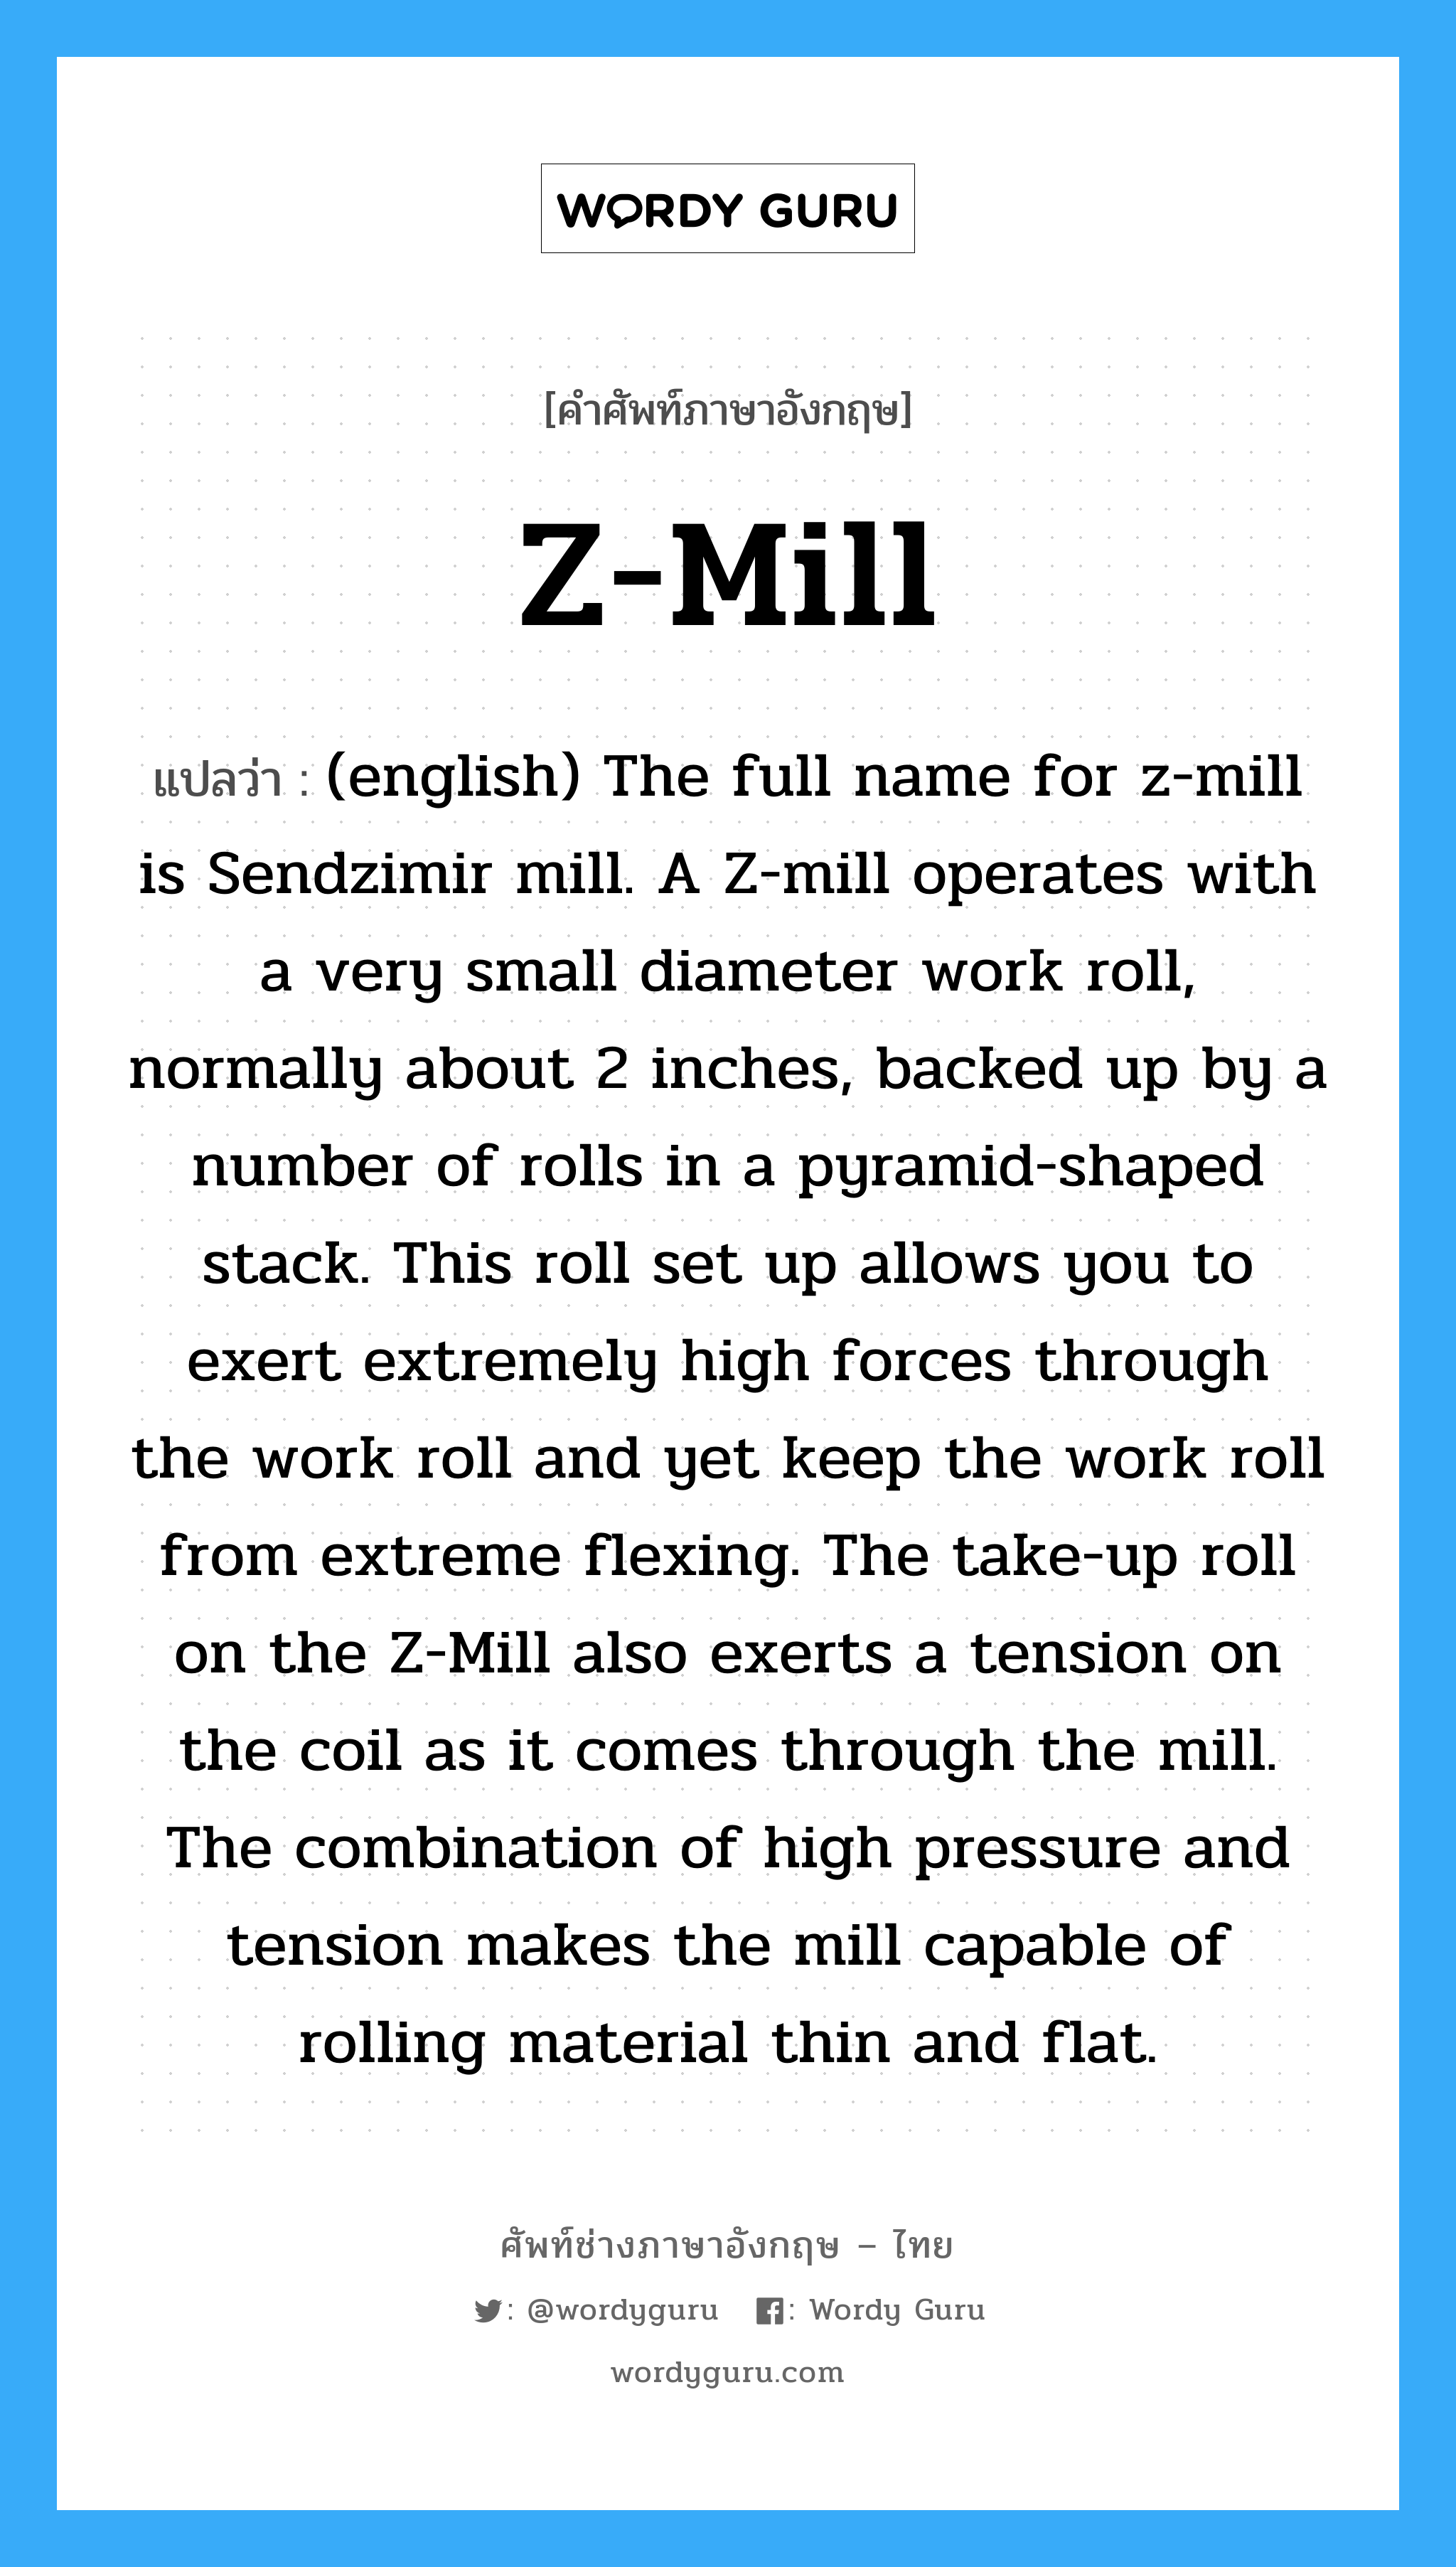 (english) The full name for z-mill is Sendzimir mill. A Z-mill operates with a very small diameter work roll, normally about 2 inches, backed up by a number of rolls in a pyramid-shaped stack. This roll set up allows you to exert extremely high forces through the work roll and yet keep the work roll from extreme flexing. The take-up roll on the Z-Mill also exerts a tension on the coil as it comes through the mill. The combination of high pressure and tension makes the mill capable of rolling material thin and flat. ภาษาอังกฤษ?, คำศัพท์ช่างภาษาอังกฤษ - ไทย (english) The full name for z-mill is Sendzimir mill. A Z-mill operates with a very small diameter work roll, normally about 2 inches, backed up by a number of rolls in a pyramid-shaped stack. This roll set up allows you to exert extremely high forces through the work roll and yet keep the work roll from extreme flexing. The take-up roll on the Z-Mill also exerts a tension on the coil as it comes through the mill. The combination of high pressure and tension makes the mill capable of rolling material thin and flat. คำศัพท์ภาษาอังกฤษ (english) The full name for z-mill is Sendzimir mill. A Z-mill operates with a very small diameter work roll, normally about 2 inches, backed up by a number of rolls in a pyramid-shaped stack. This roll set up allows you to exert extremely high forces through the work roll and yet keep the work roll from extreme flexing. The take-up roll on the Z-Mill also exerts a tension on the coil as it comes through the mill. The combination of high pressure and tension makes the mill capable of rolling material thin and flat. แปลว่า Z-Mill